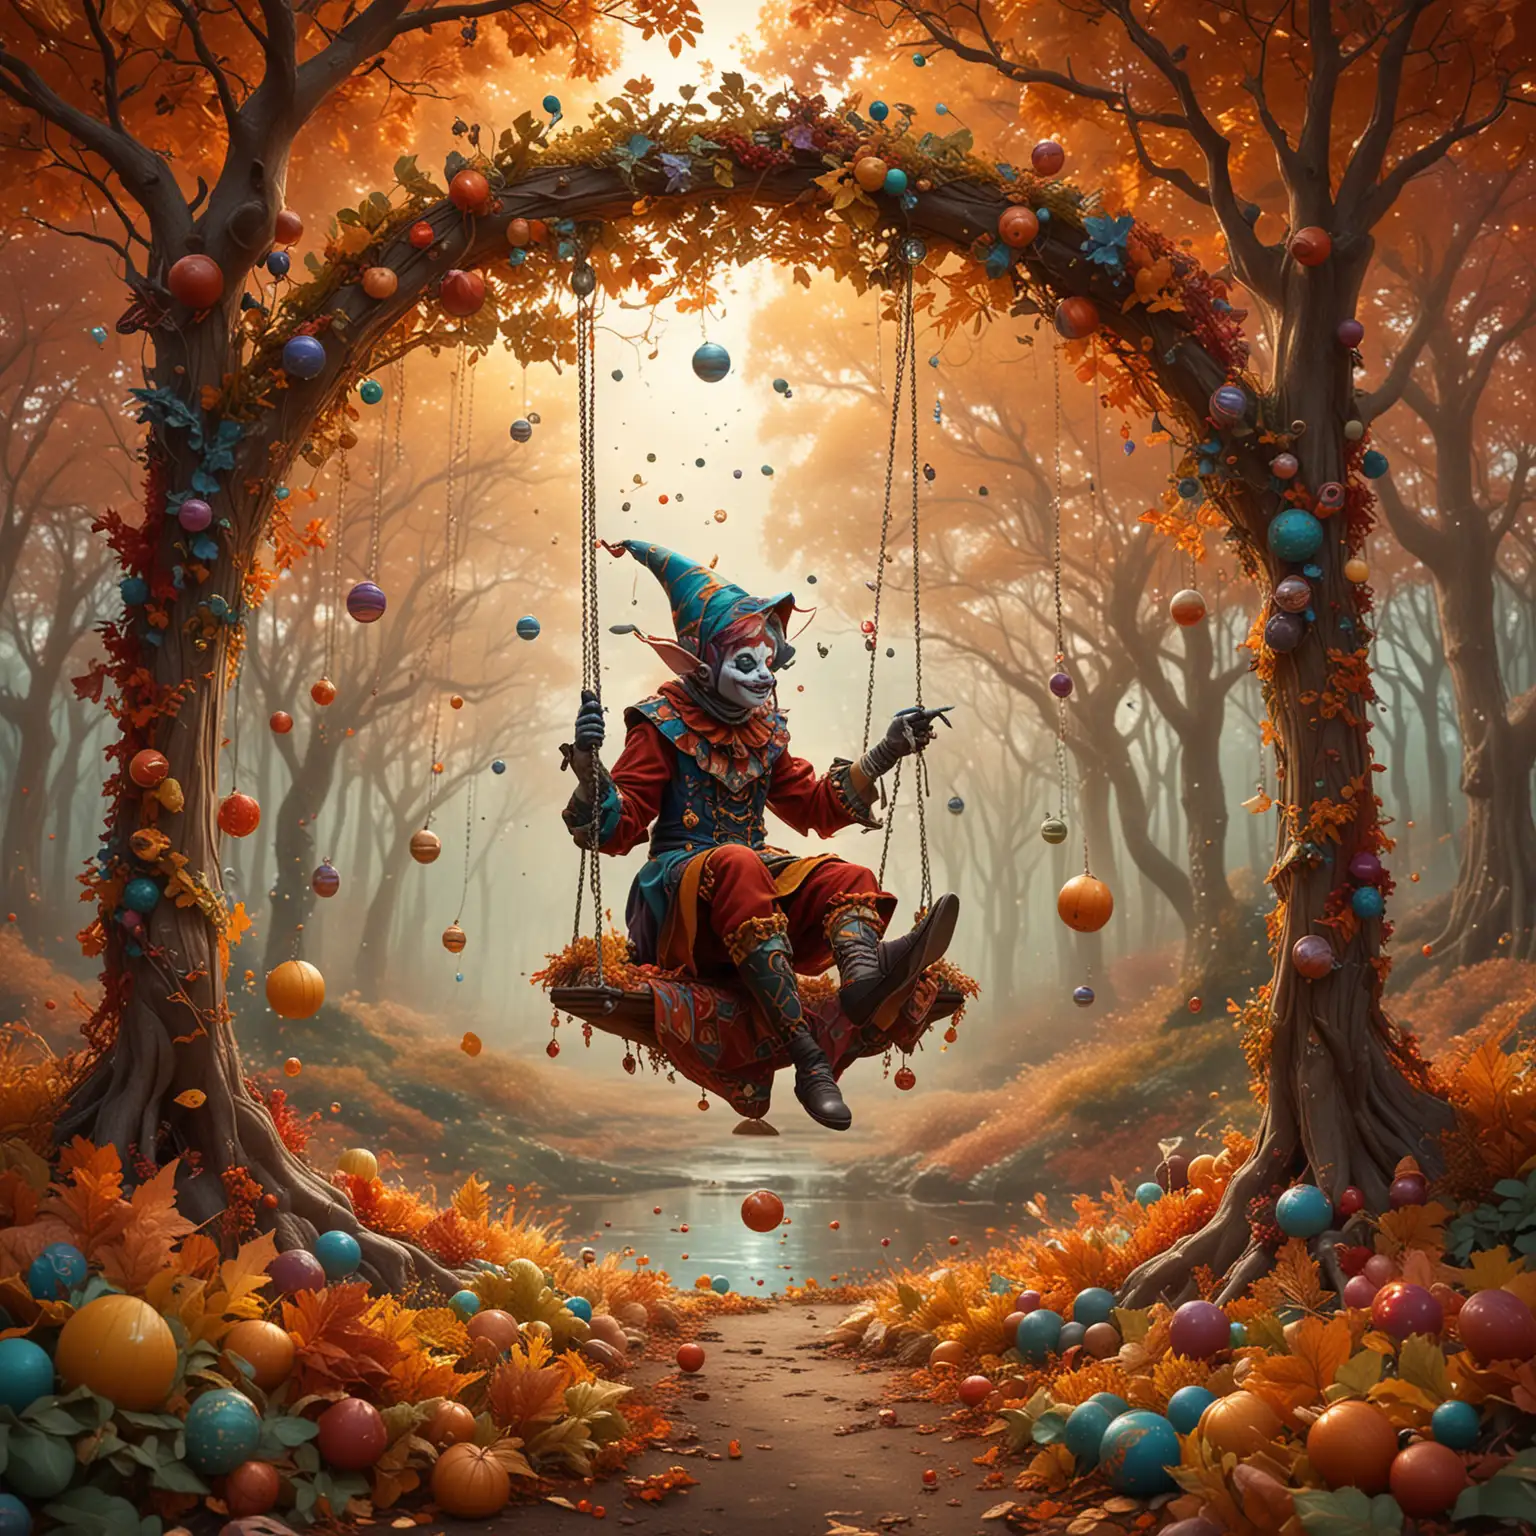 A whimsical and fantastical autumn scene with a colorful jester-like figure swinging on a swing amidst a backdrop of vibrant fall foliage, floating orbs, and swirling patterns. The prompt could be: 

A surreal, dreamlike autumn scene featuring a jester-like character on a swing surrounded by a swirling, fantastical landscape of colorful leaves, floating orbs, and intricate patterns, in the style of Chris B.